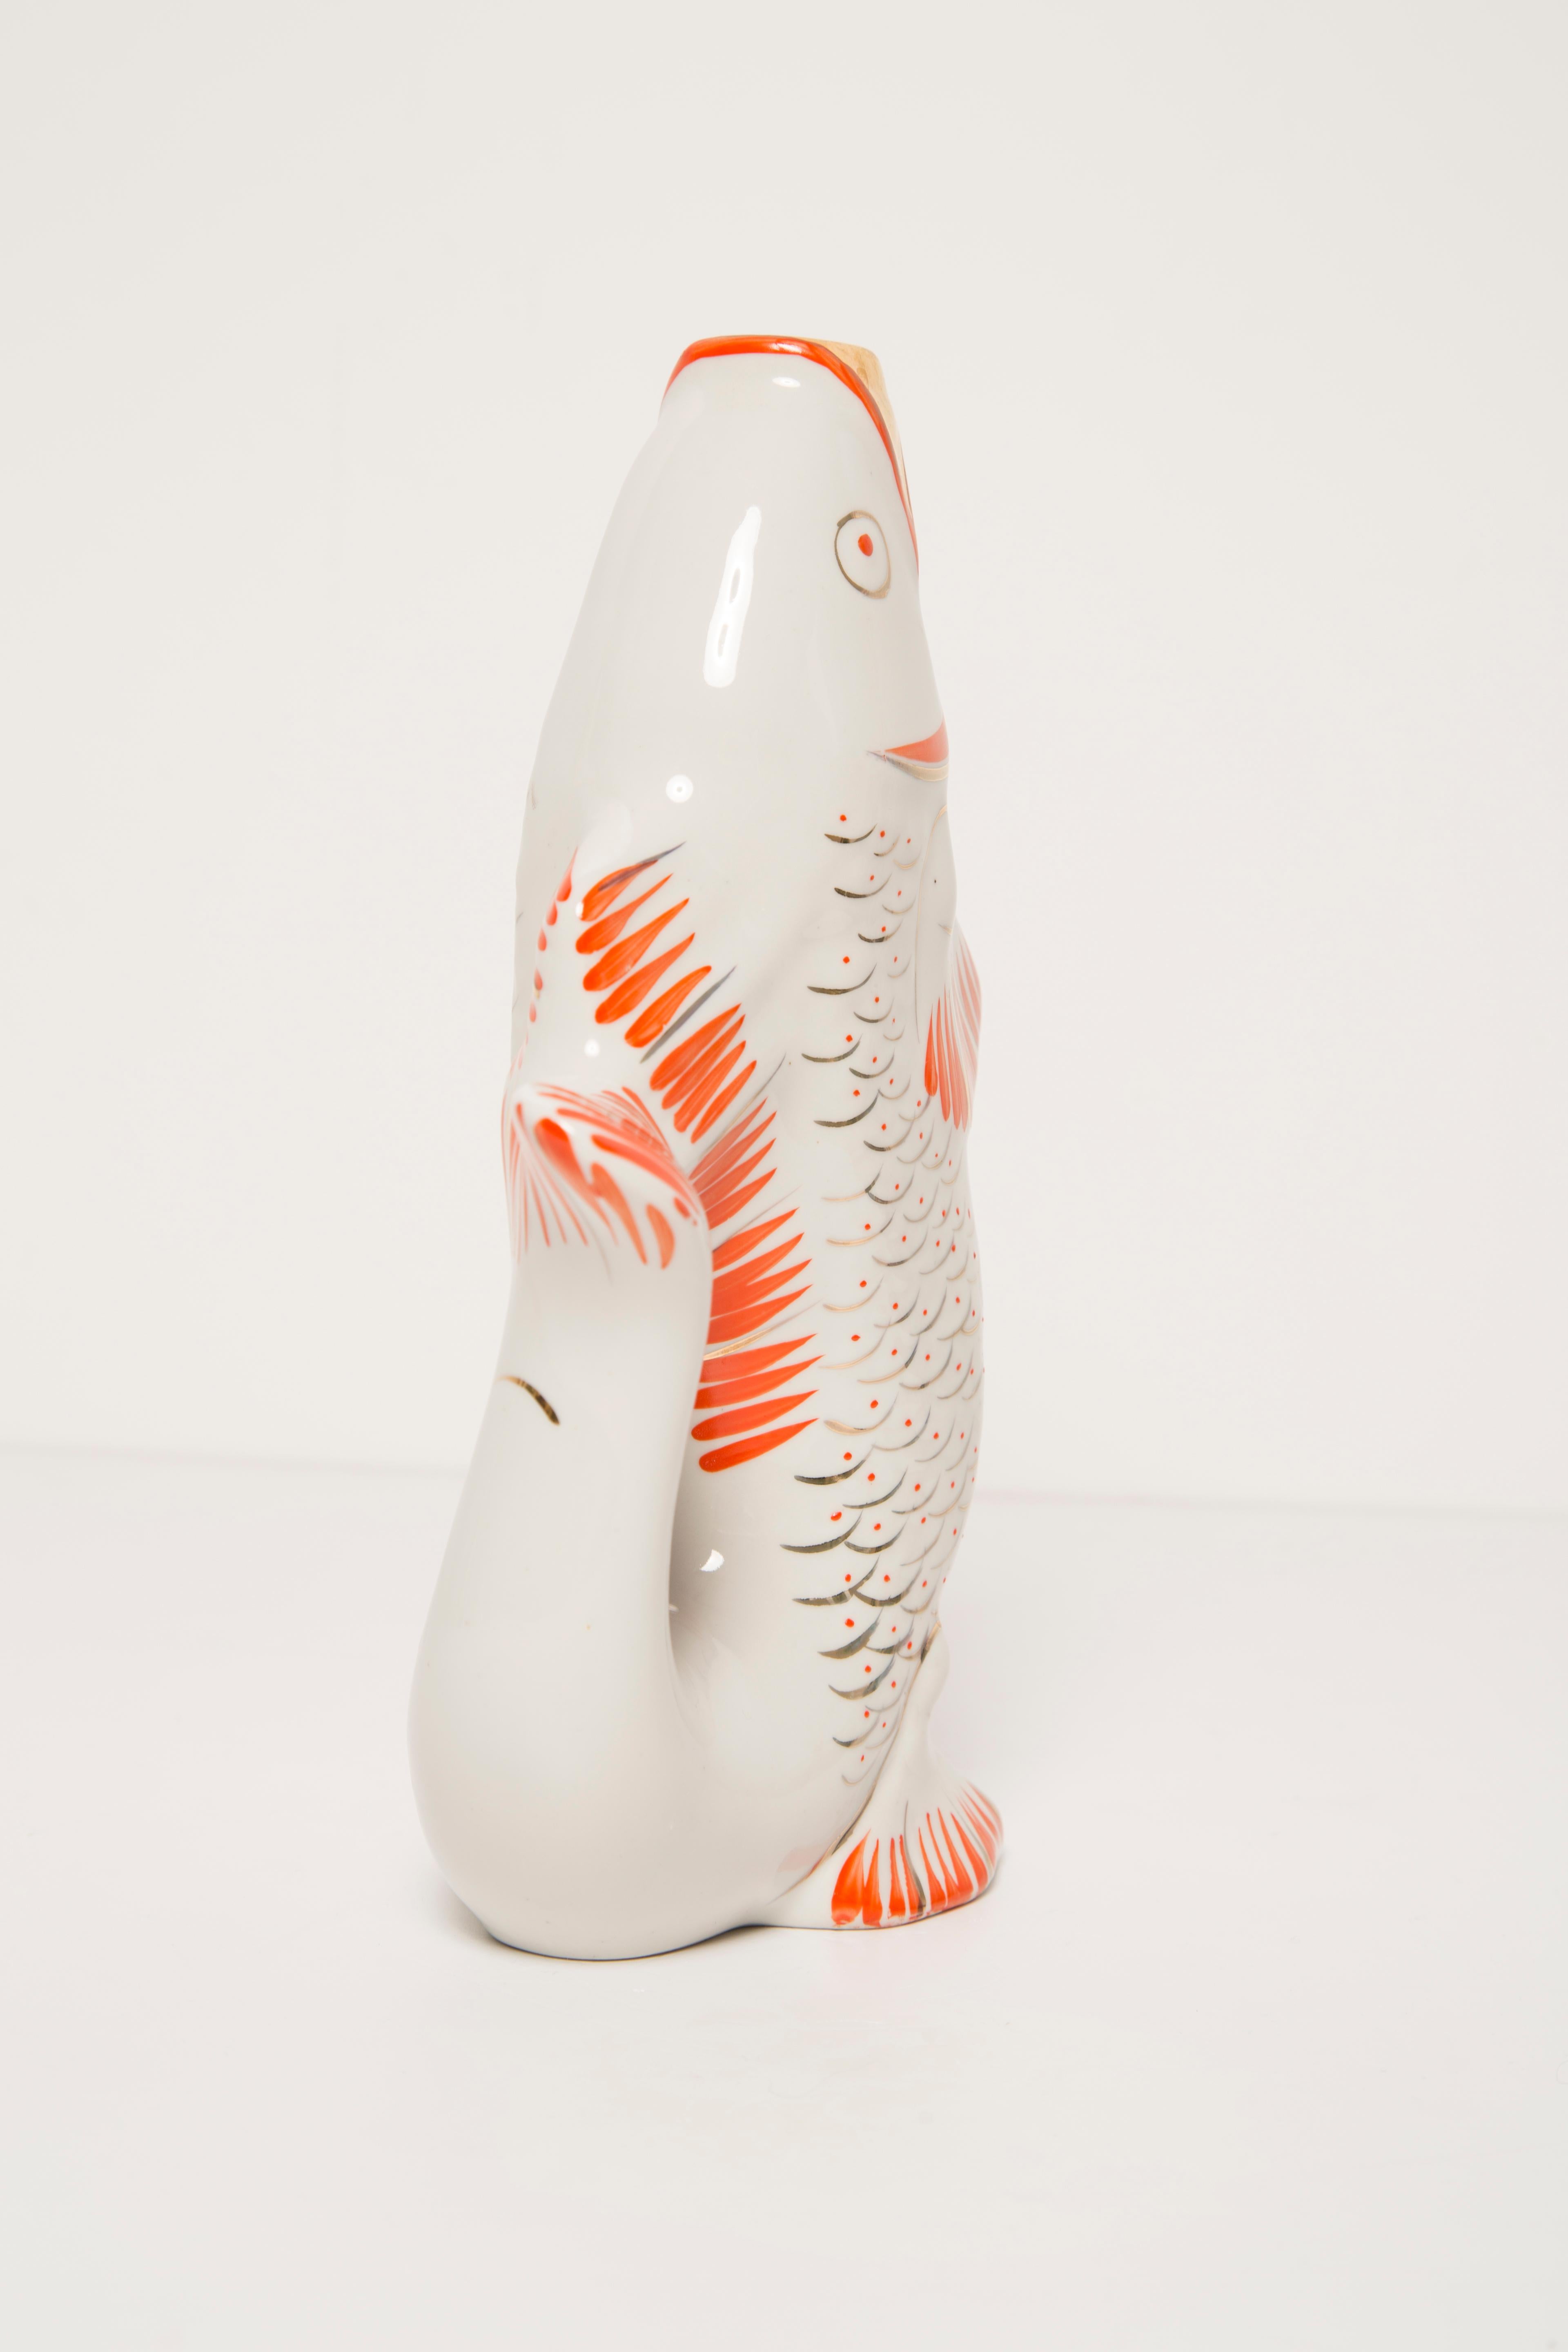 Porcelain White Fish Glass Decanter or Vase, 20th Century, Europe, 1960s For Sale